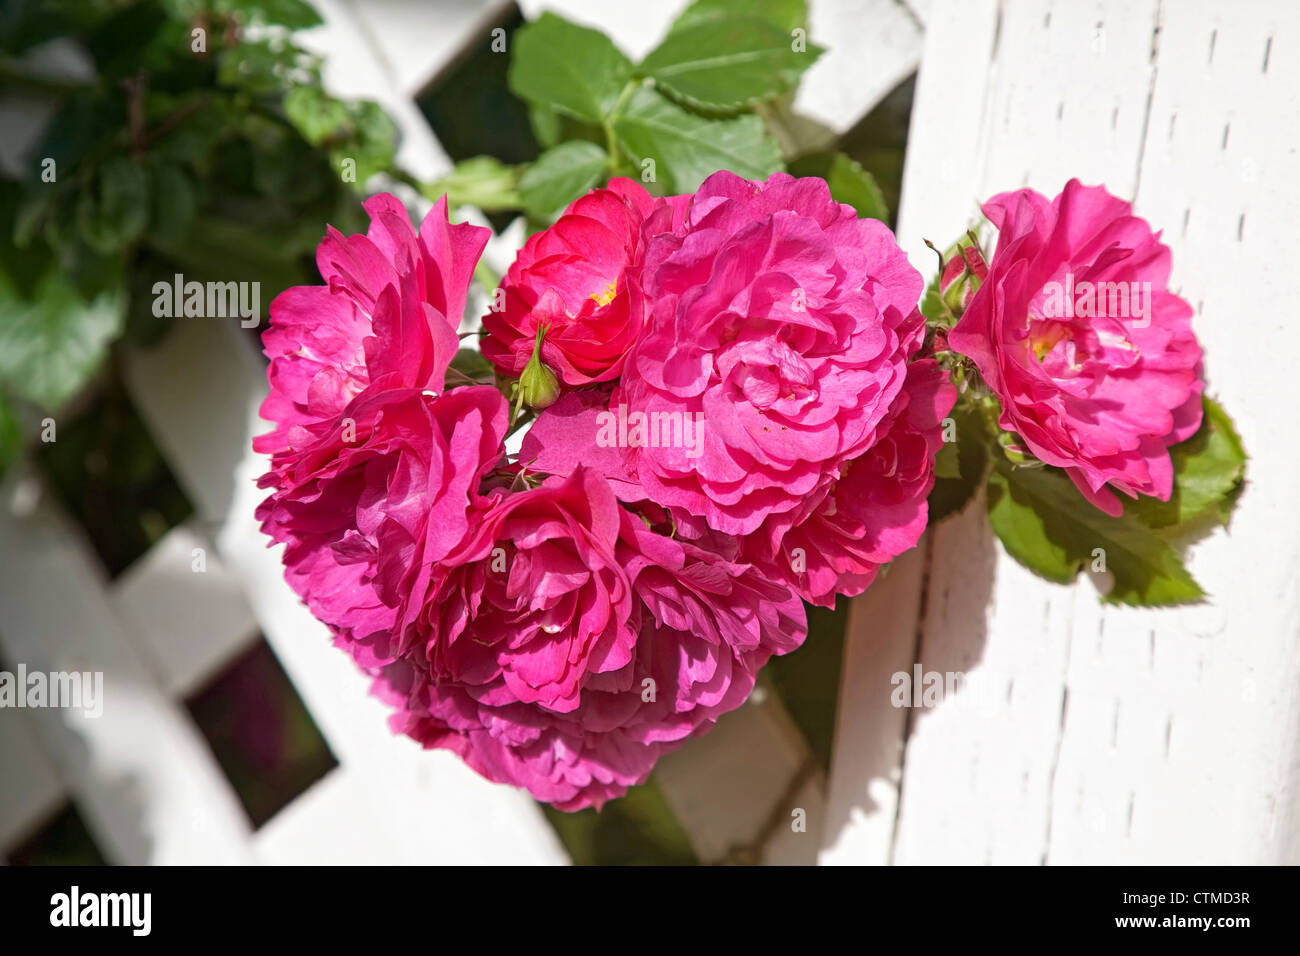 Old fashioned type Rugosa rose 'John Cabot' growing in the home garden on a wooden arbor. Stock Photo